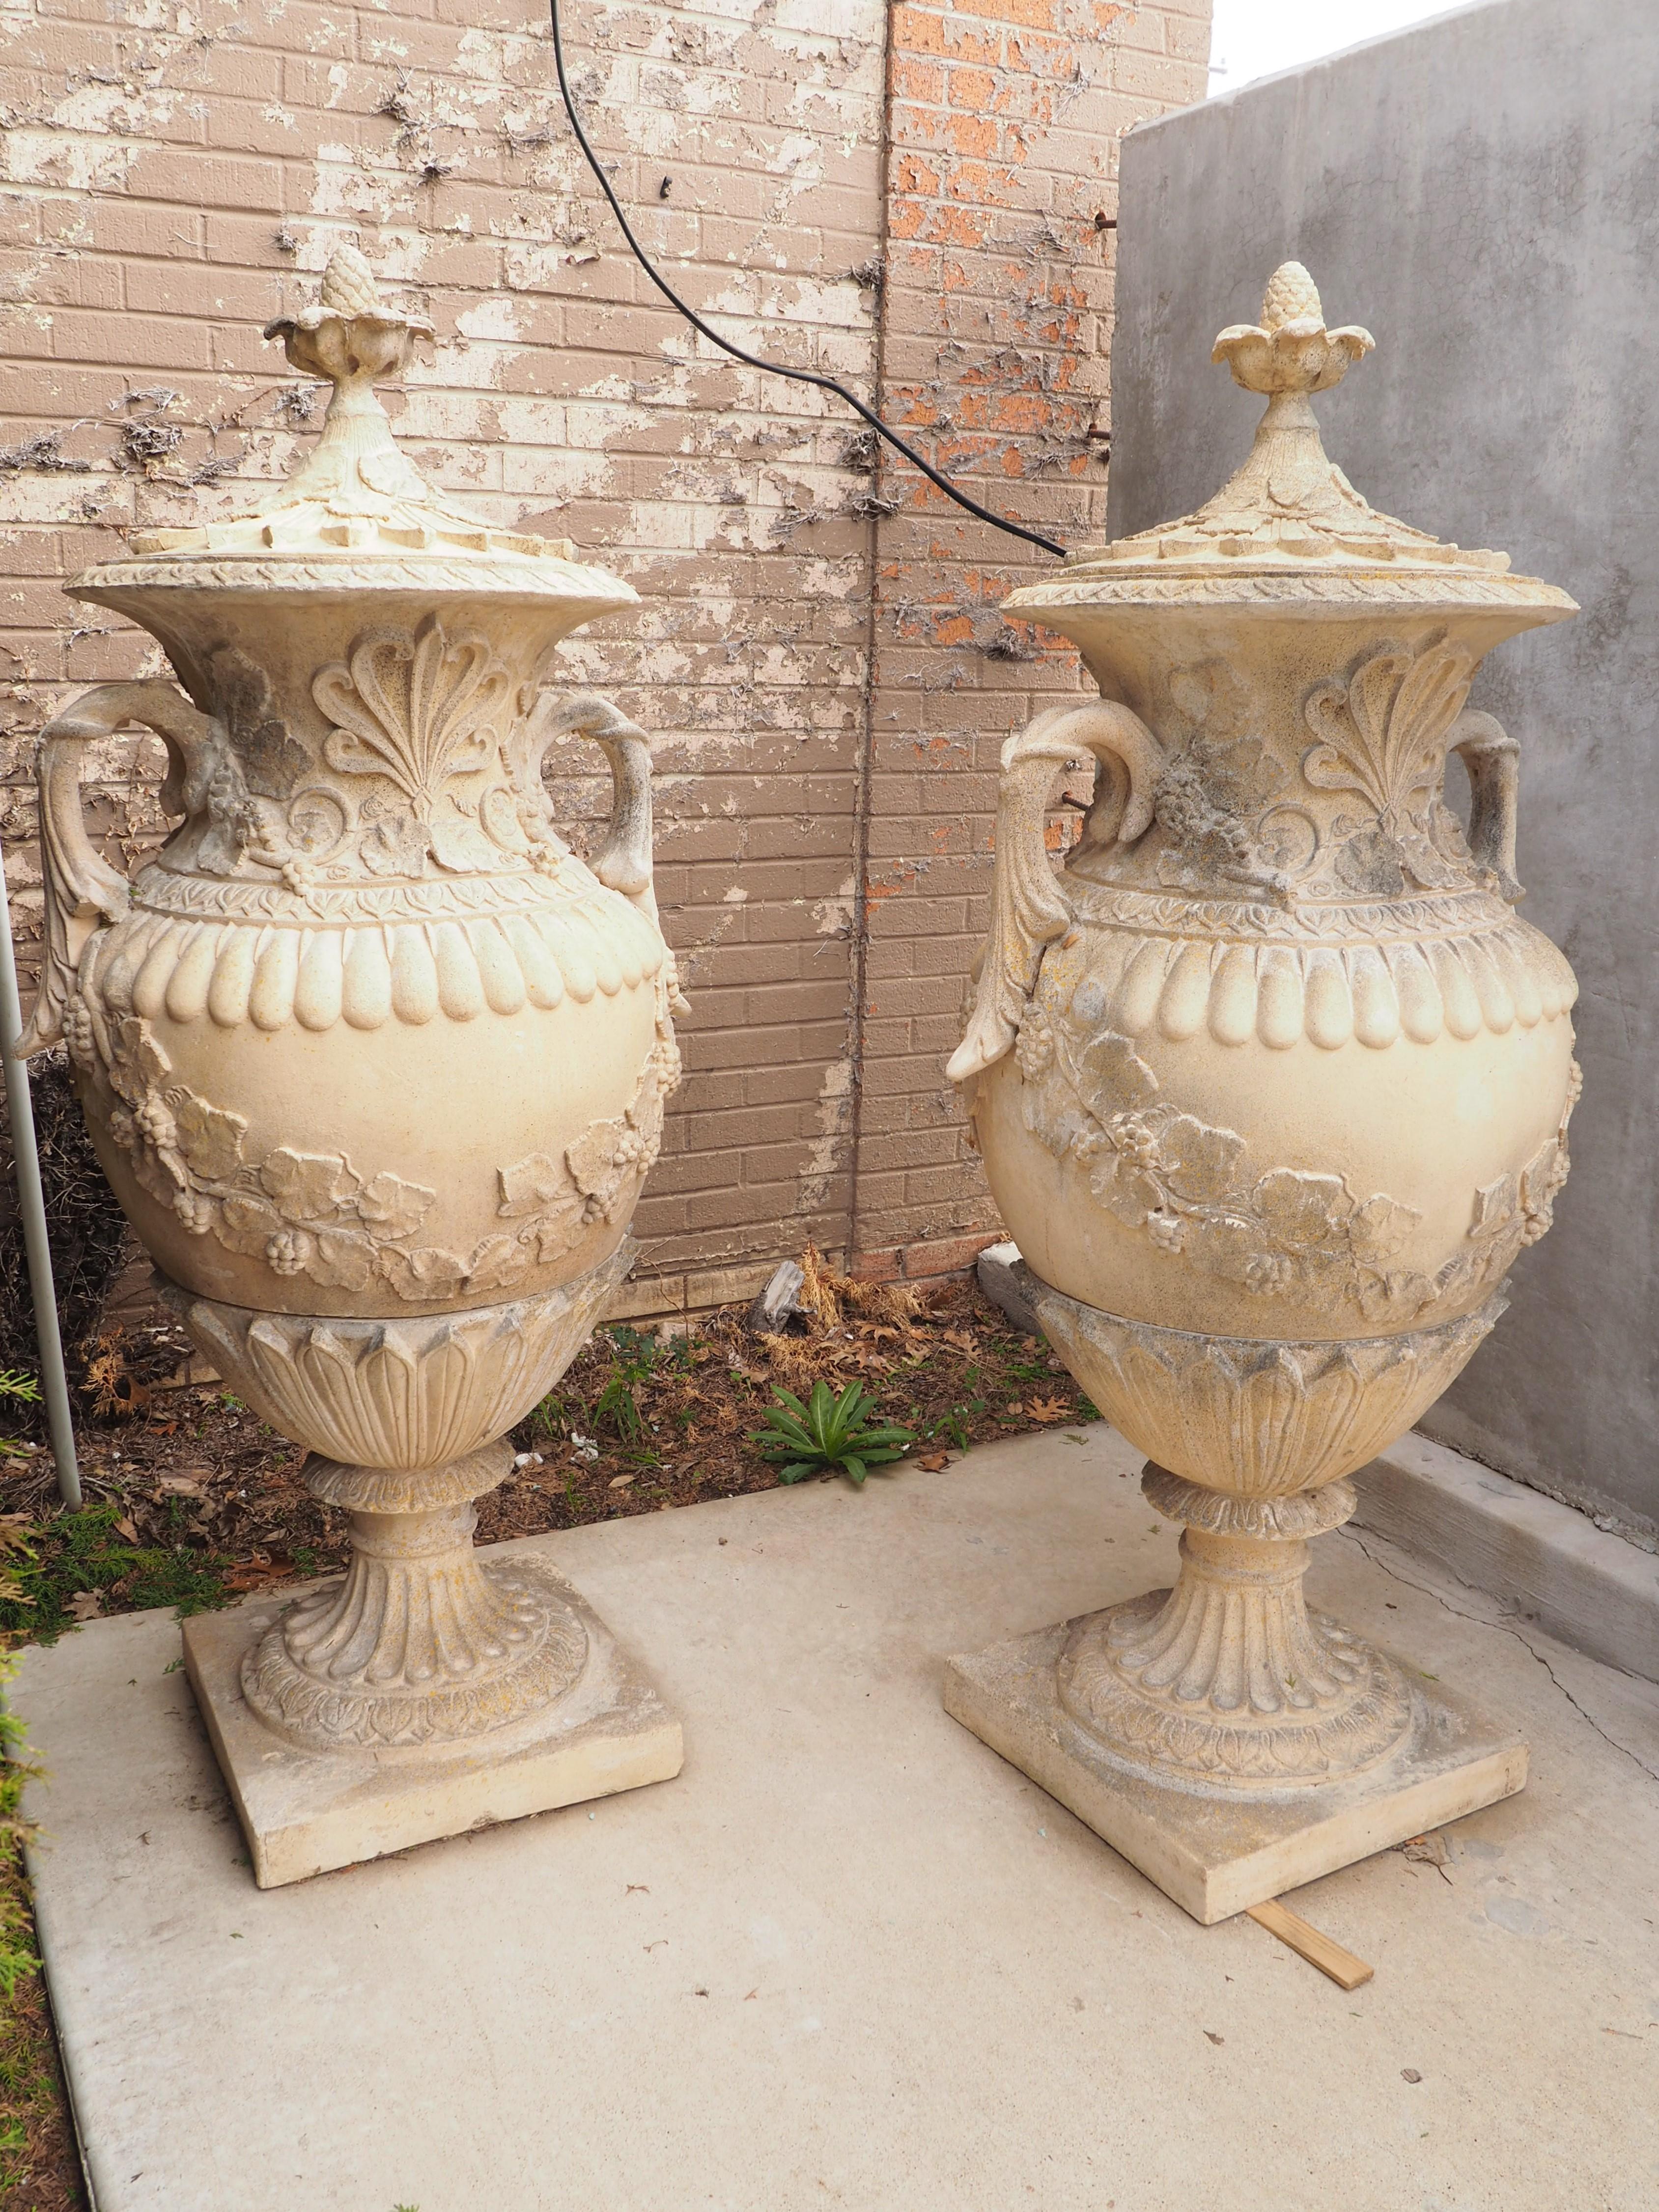 This beautiful pair of French urns, measure just over 5 feet tall. Each urn consists of three pieces of cast stone, all with nature-inspired motifs. Both lids are topped with a pinecone finial emerging from a curled leaf cup above two layers of